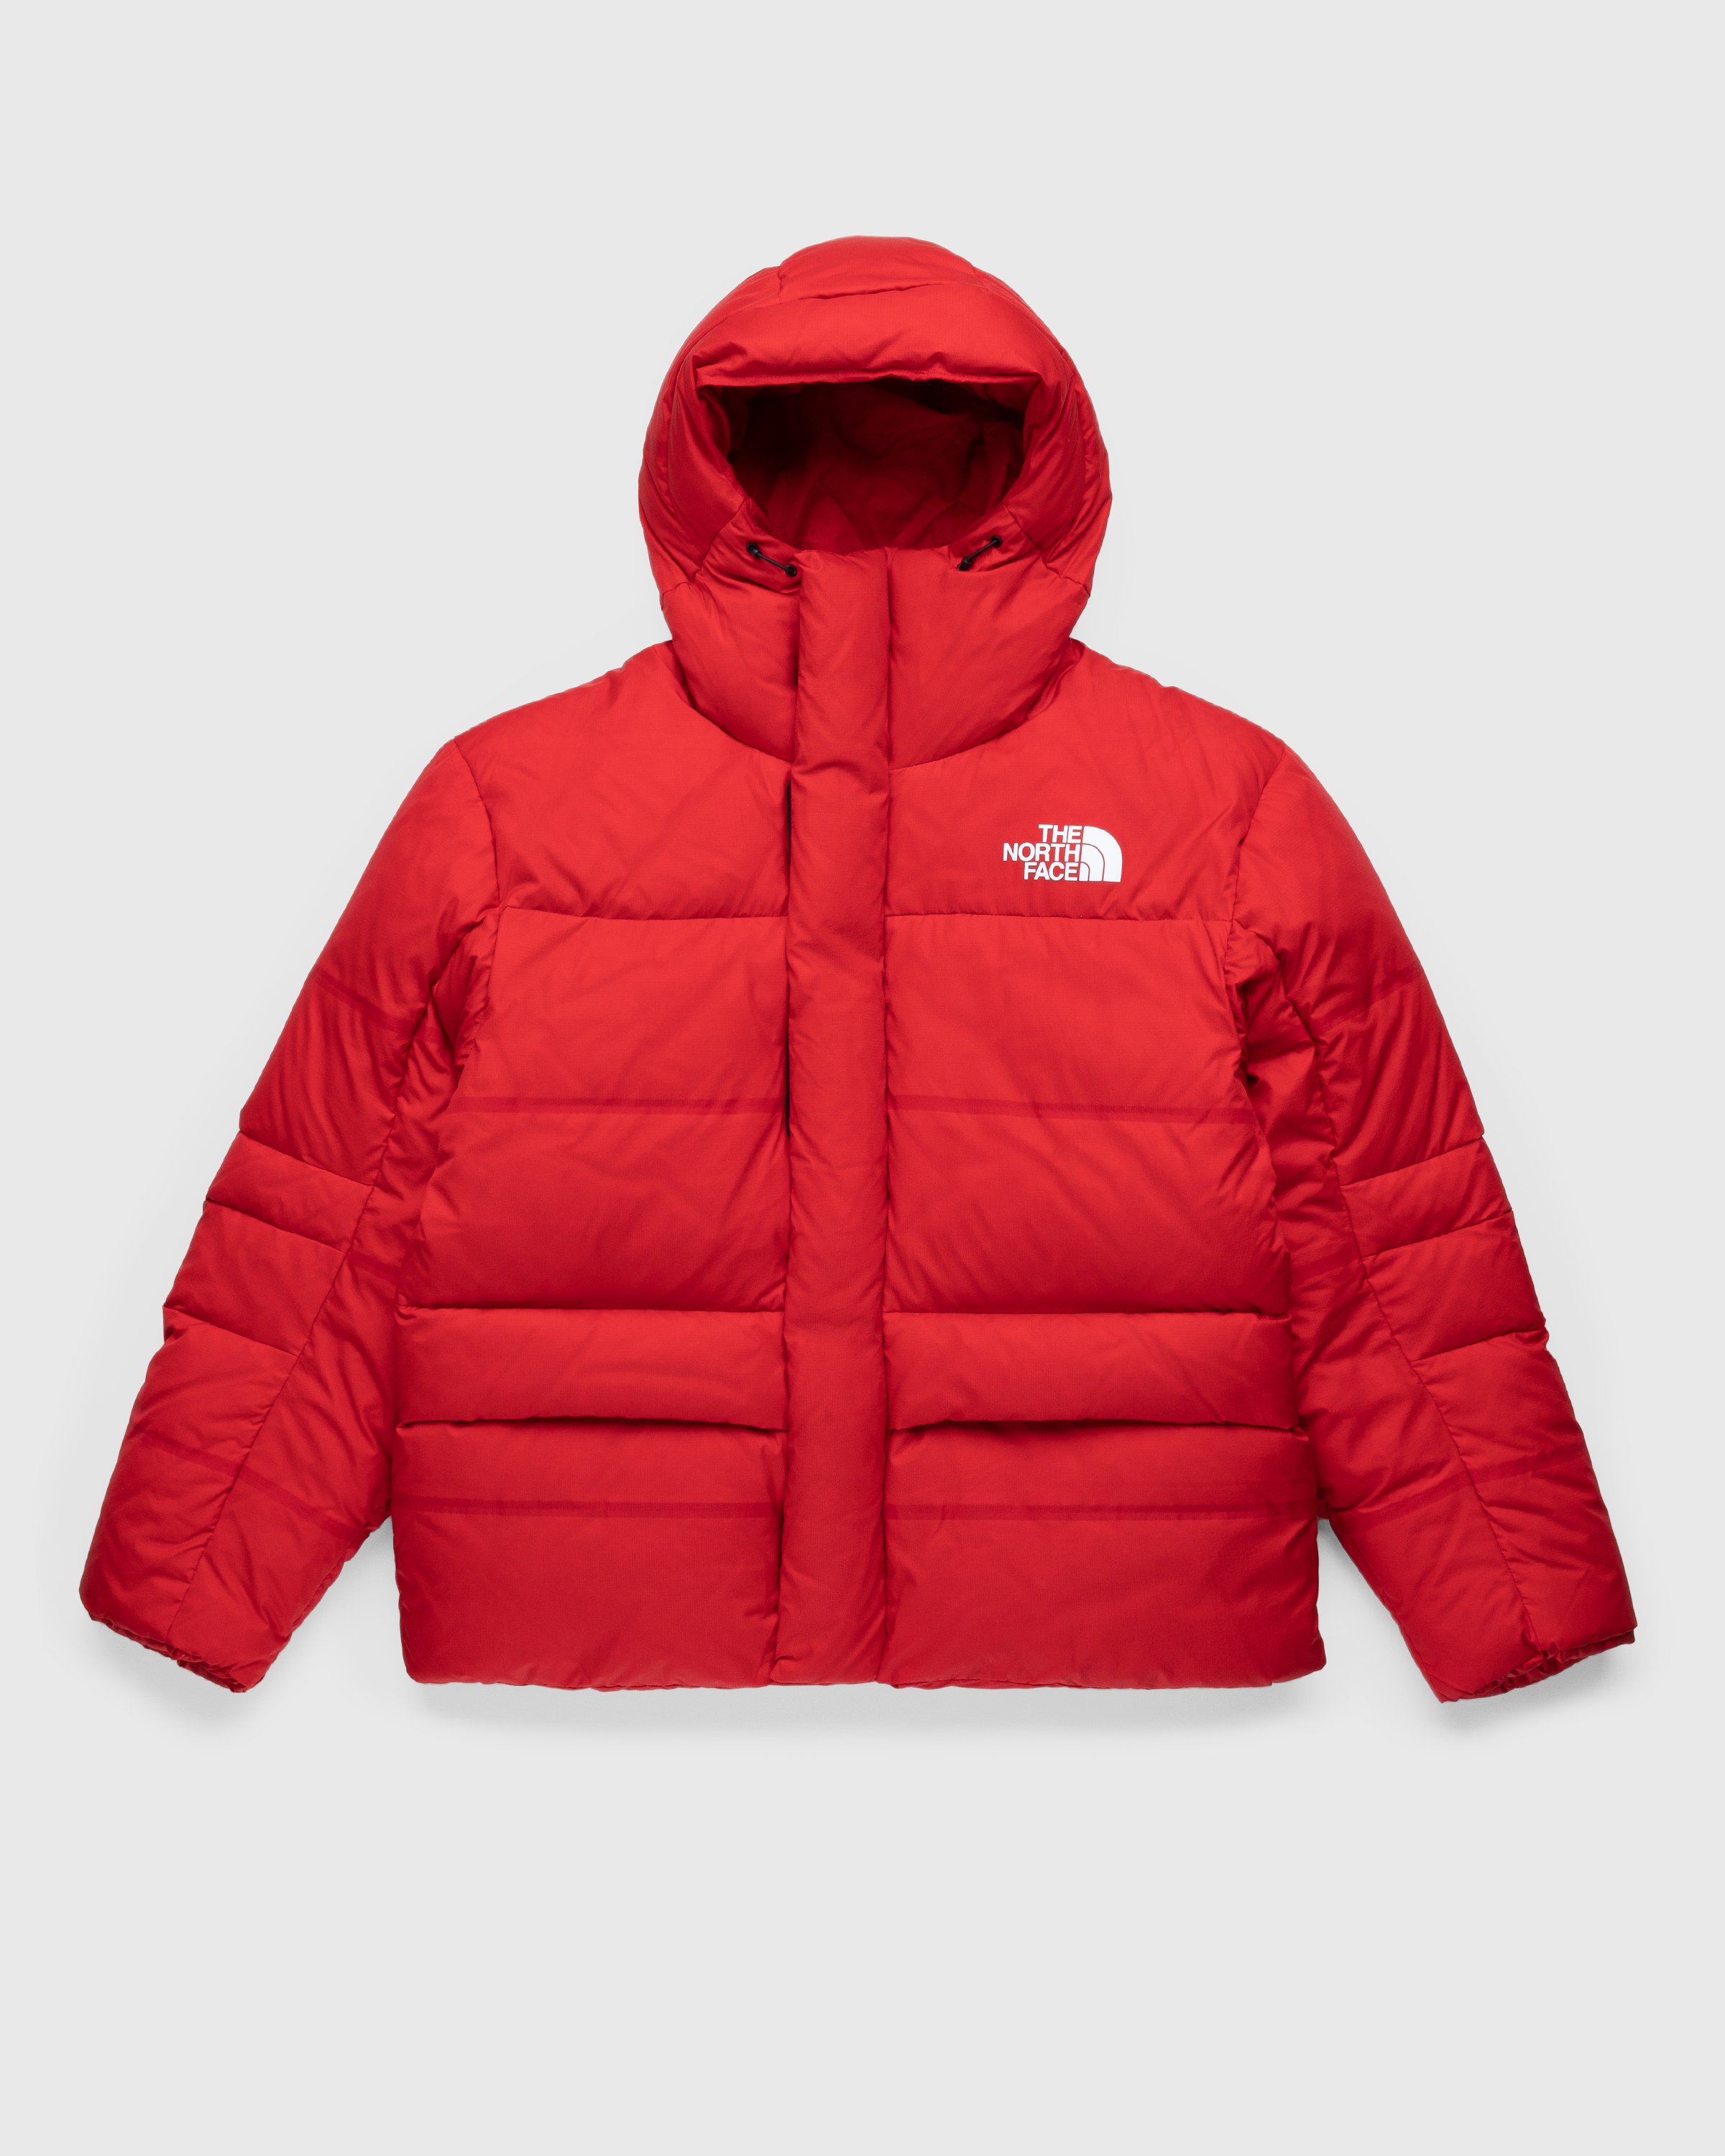 The North Face – RMST Himalayan Parka Red | Highsnobiety Shop